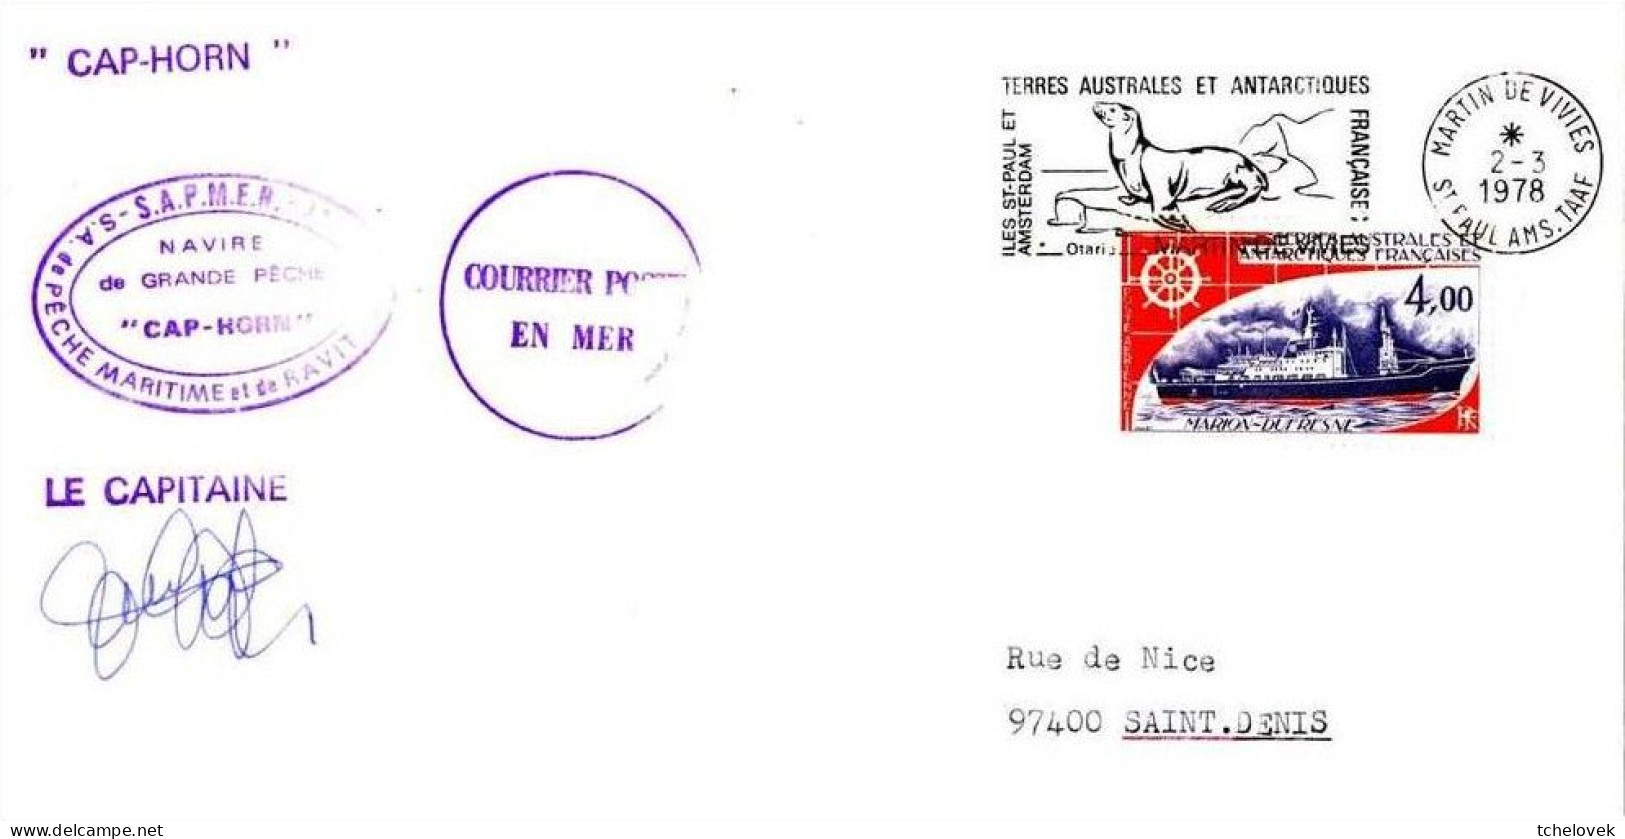 FSAT TAAF Cap Horn Sapmer 02.03.78 SPA Timbre Marion Dufresne (1) - Covers & Documents